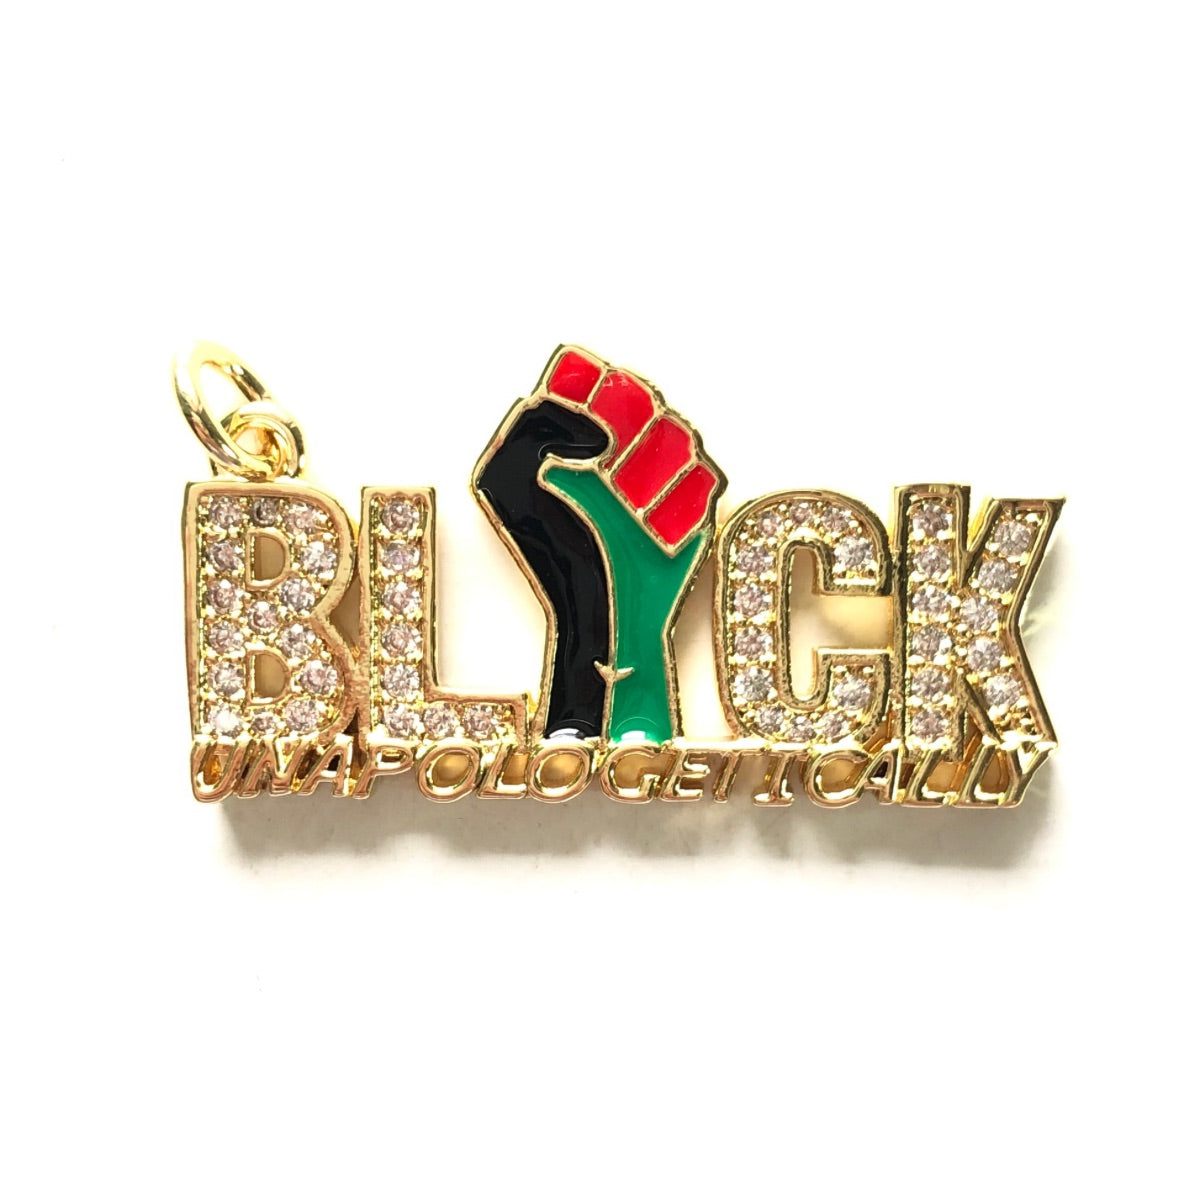 10pcs/lot 36*19mm Enamel Black Lives Matter Fist CZ Pave Black Unapologetically Word Charms for Juneteenth Black Month Awareness Gold CZ Paved Charms Juneteenth & Black History Month Awareness New Charms Arrivals Charms Beads Beyond